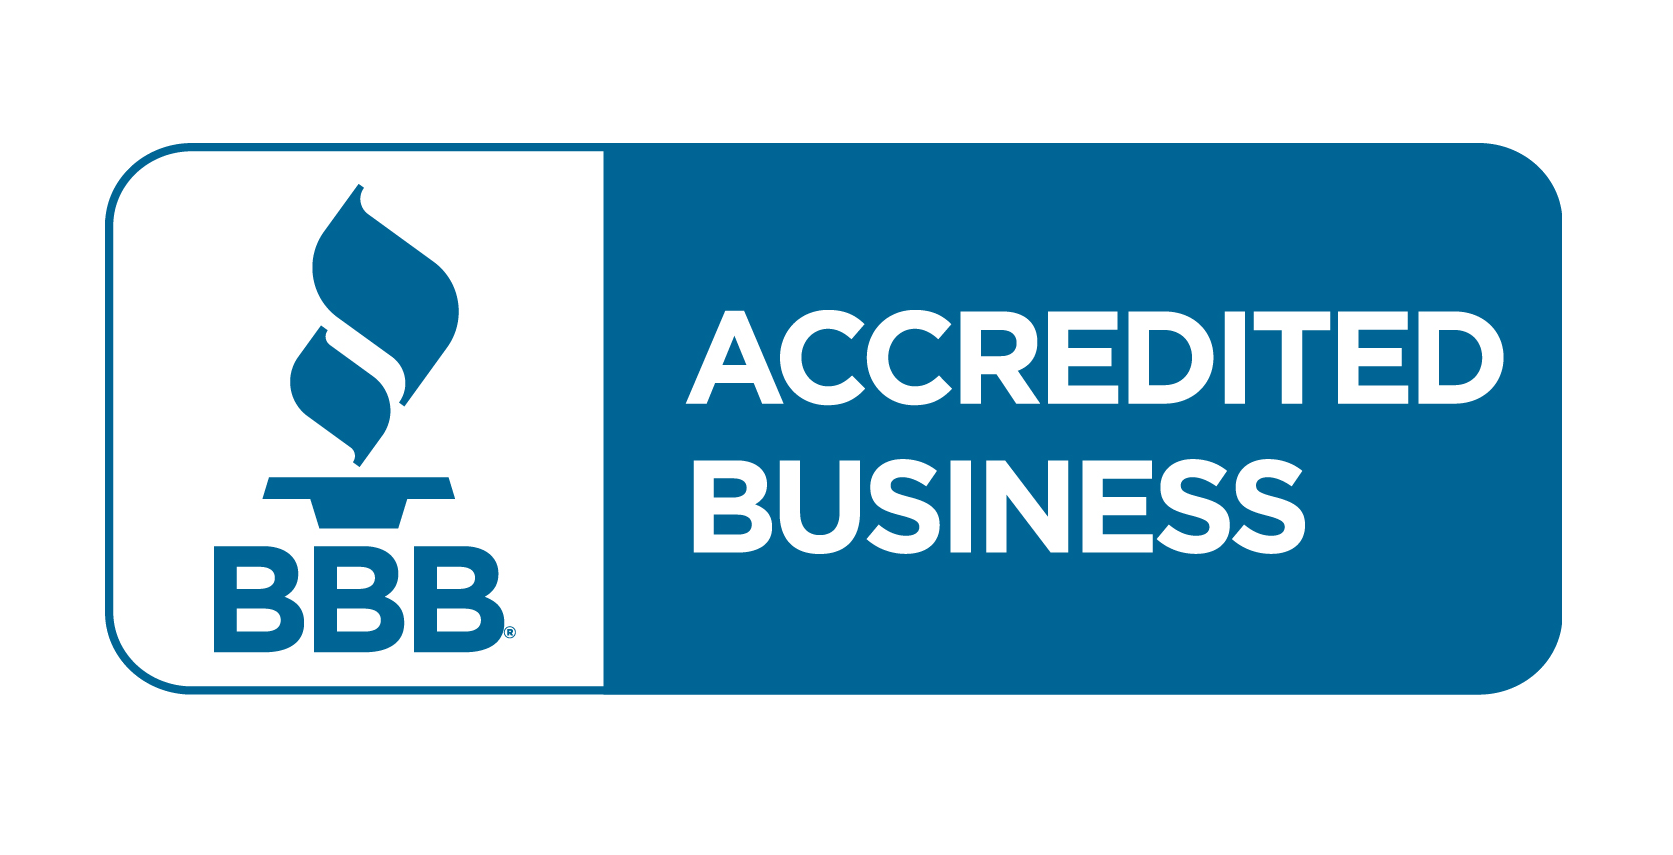 BBB Accredited Business Logo. WestPro is BBB Accredited.